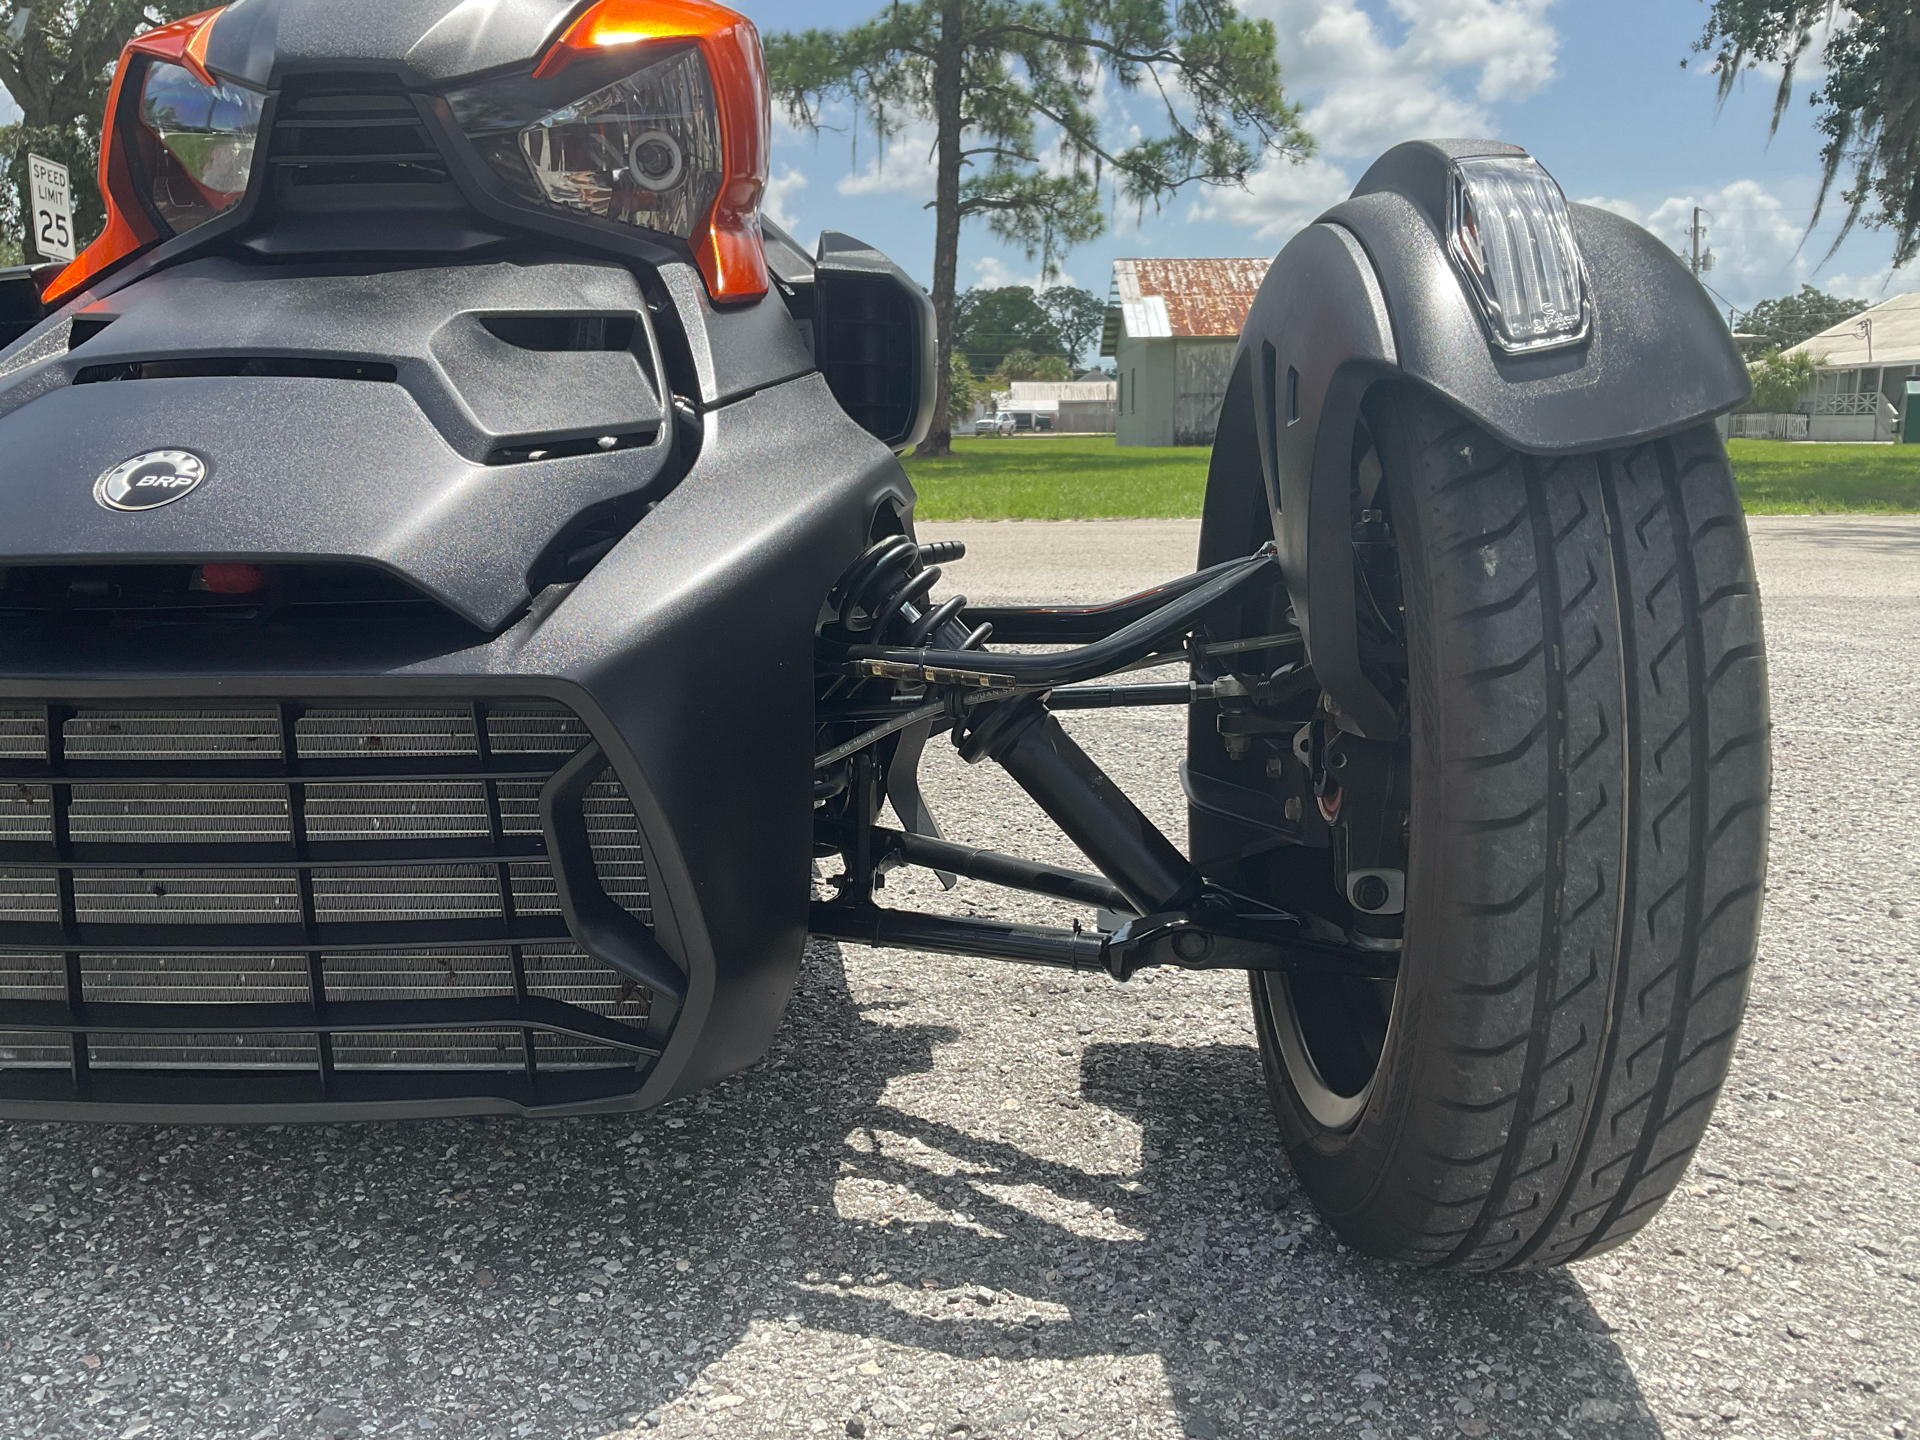 2020 Can-Am Ryker 600 ACE in Sanford, Florida - Photo 16